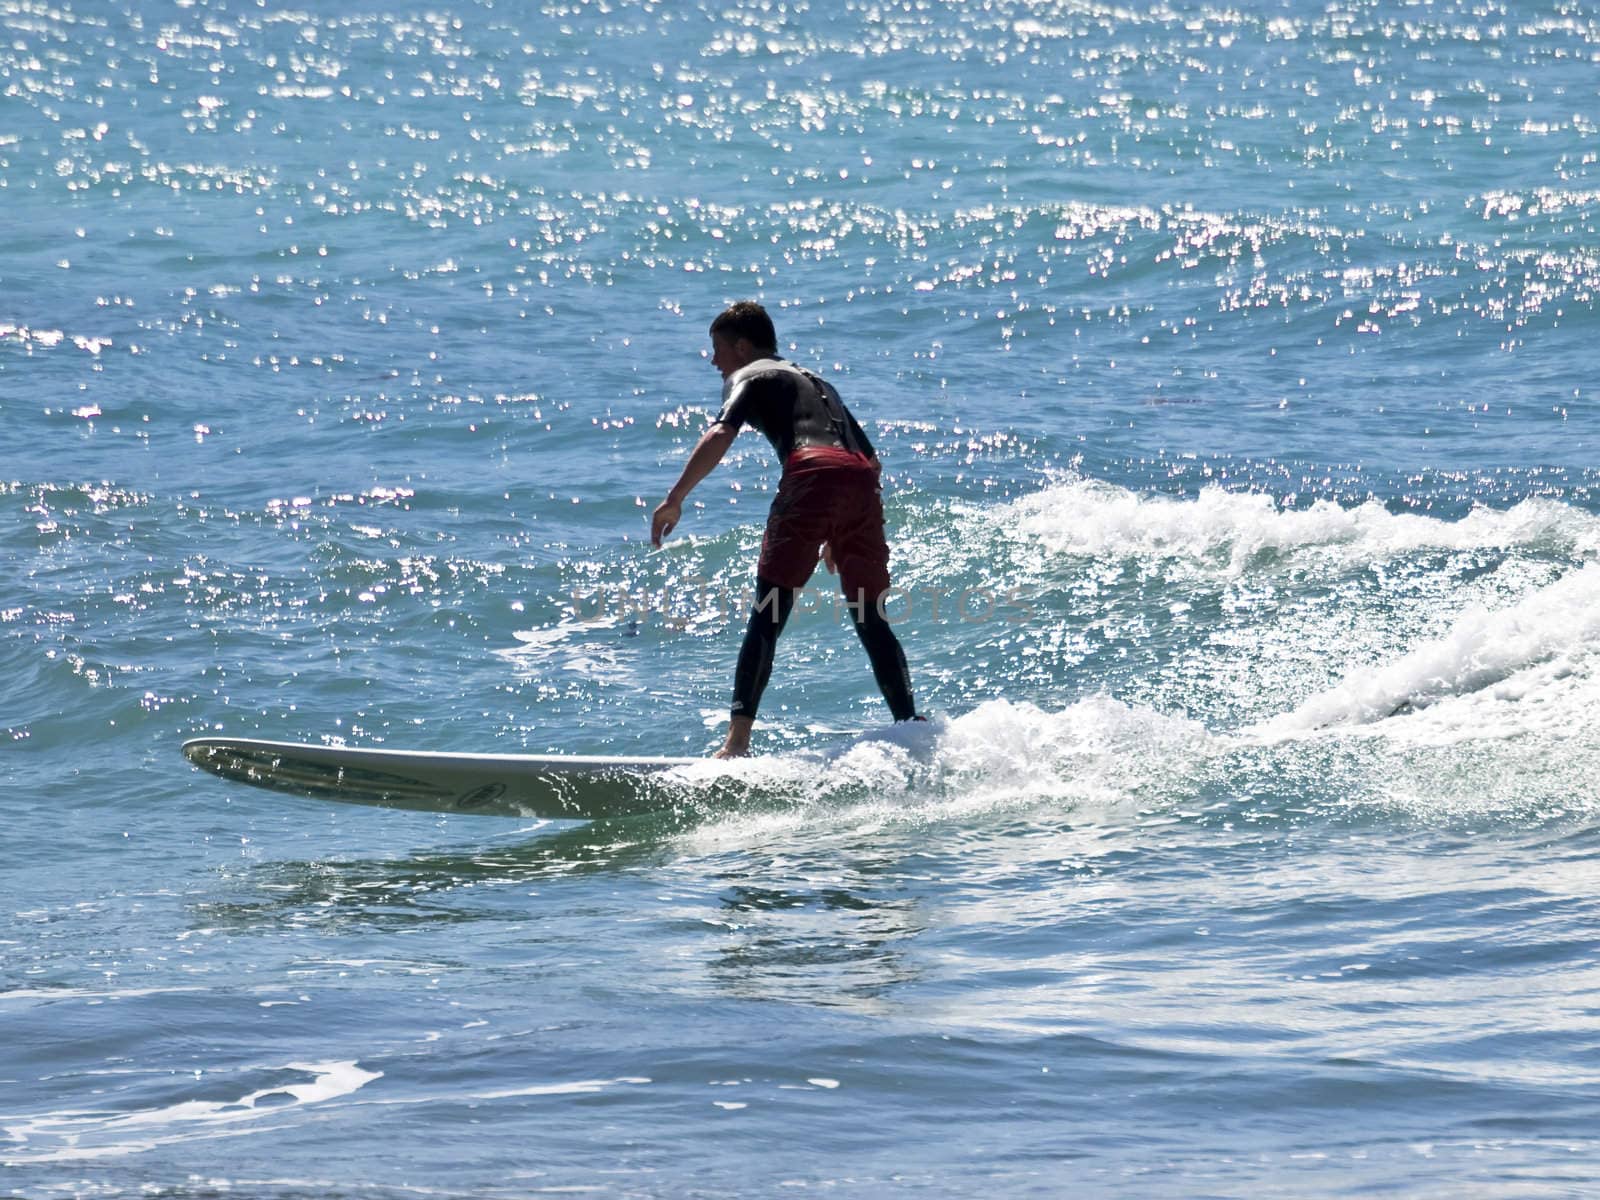 Surfing the waves is a very rare event in Malta